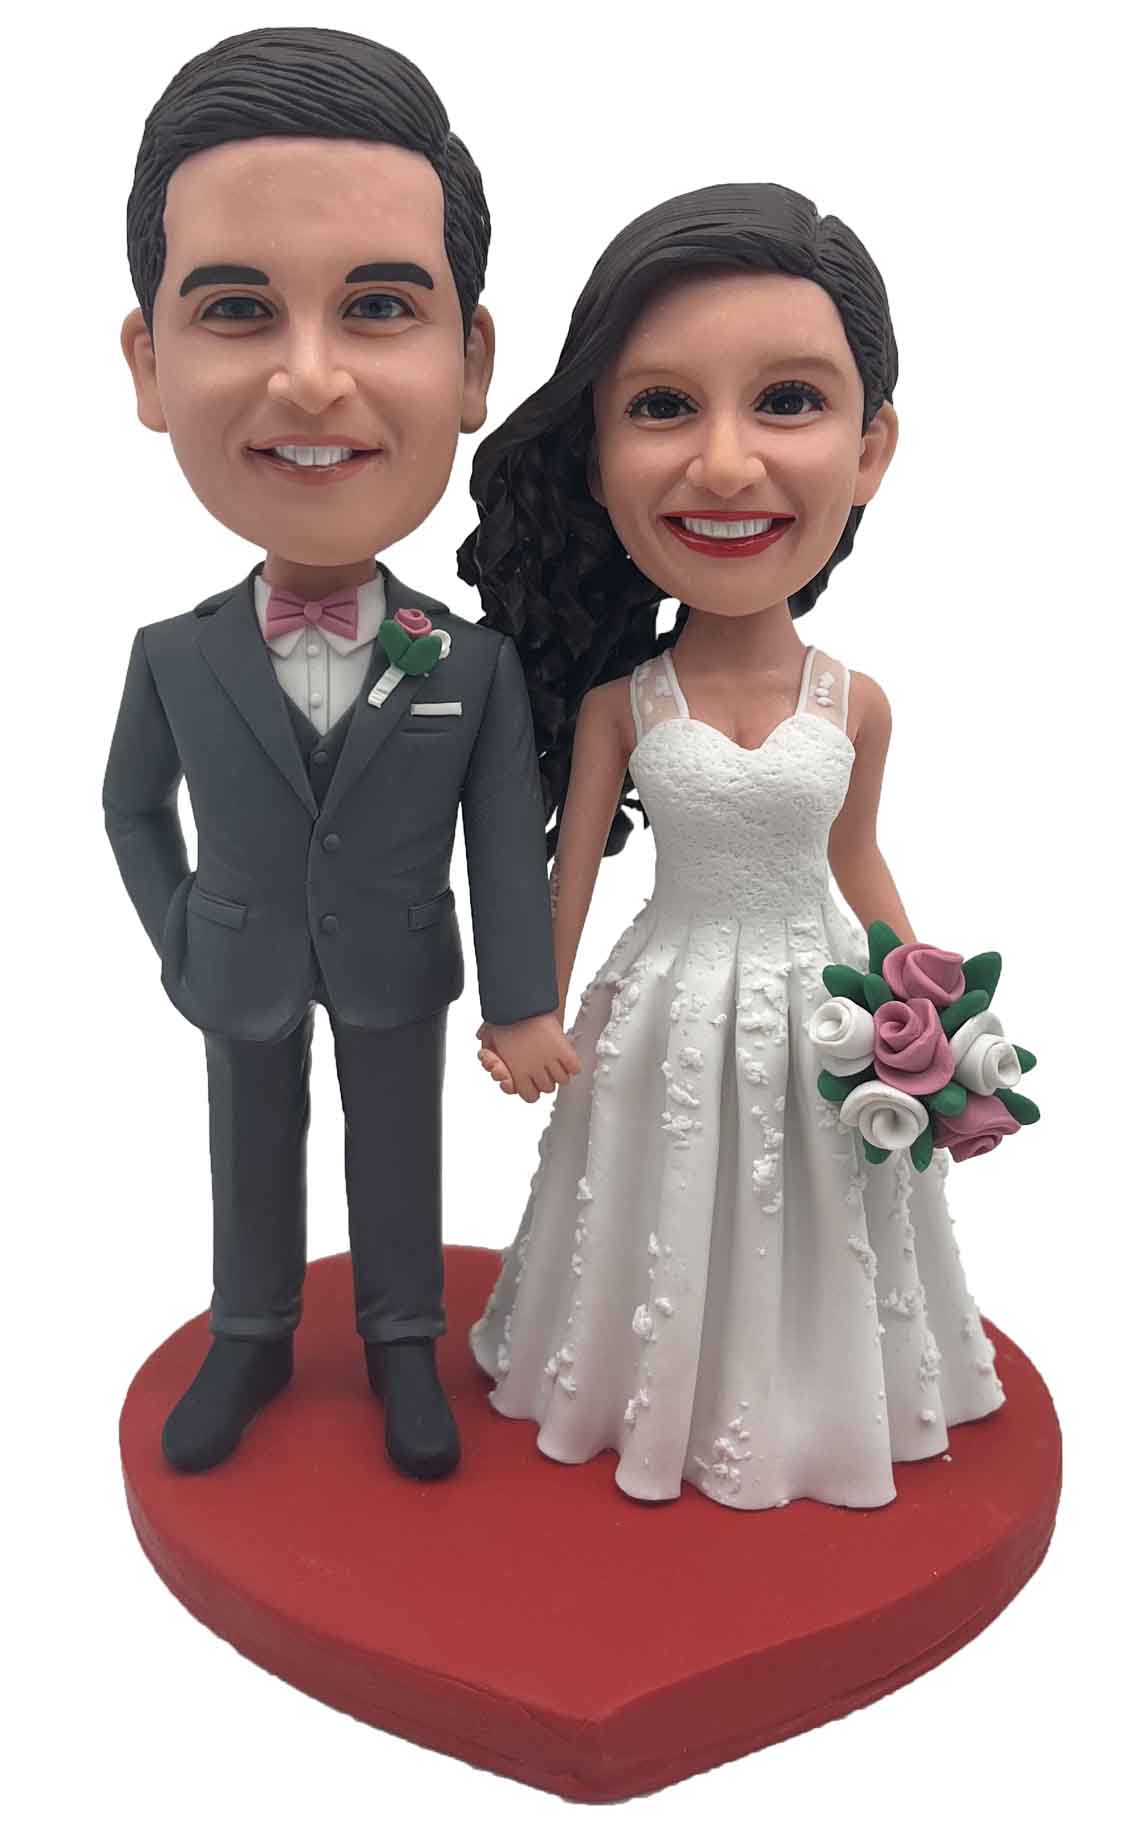 Custom Custom wedding Cake Toppers Personalized wedding cake toppers